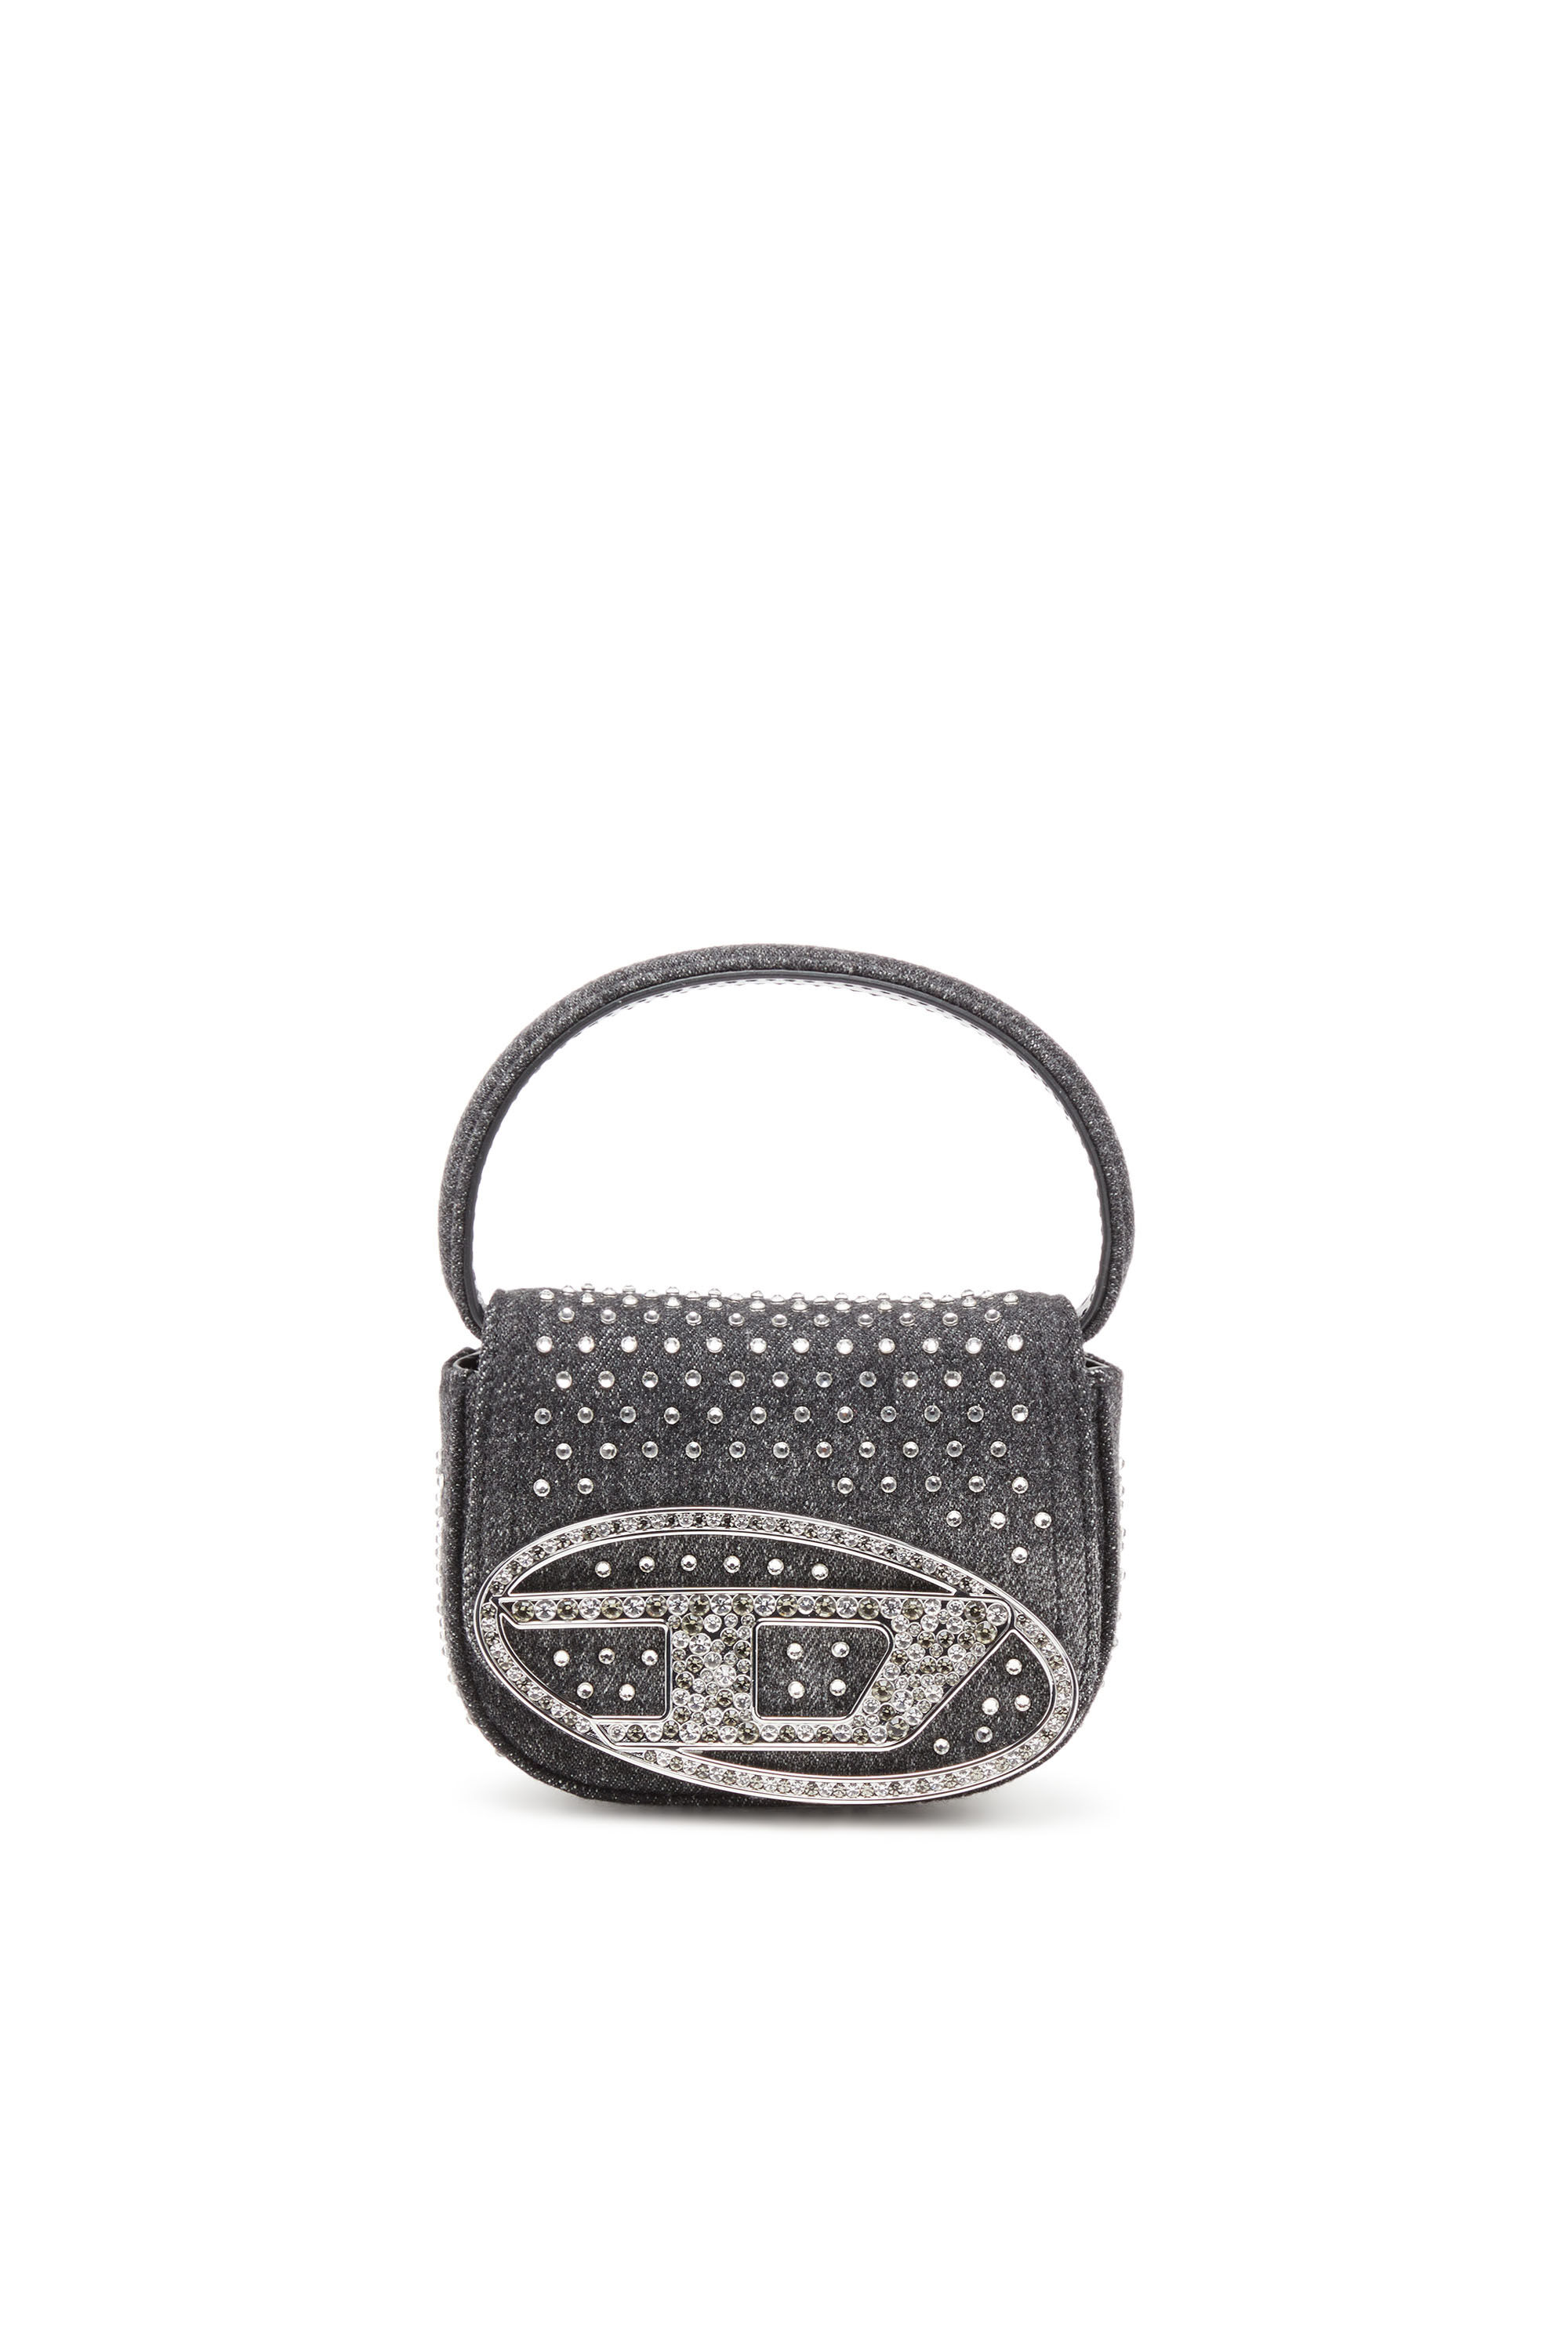 Women's 1DR Xs-Iconic mini bag in denim and crystals | Black | Diesel